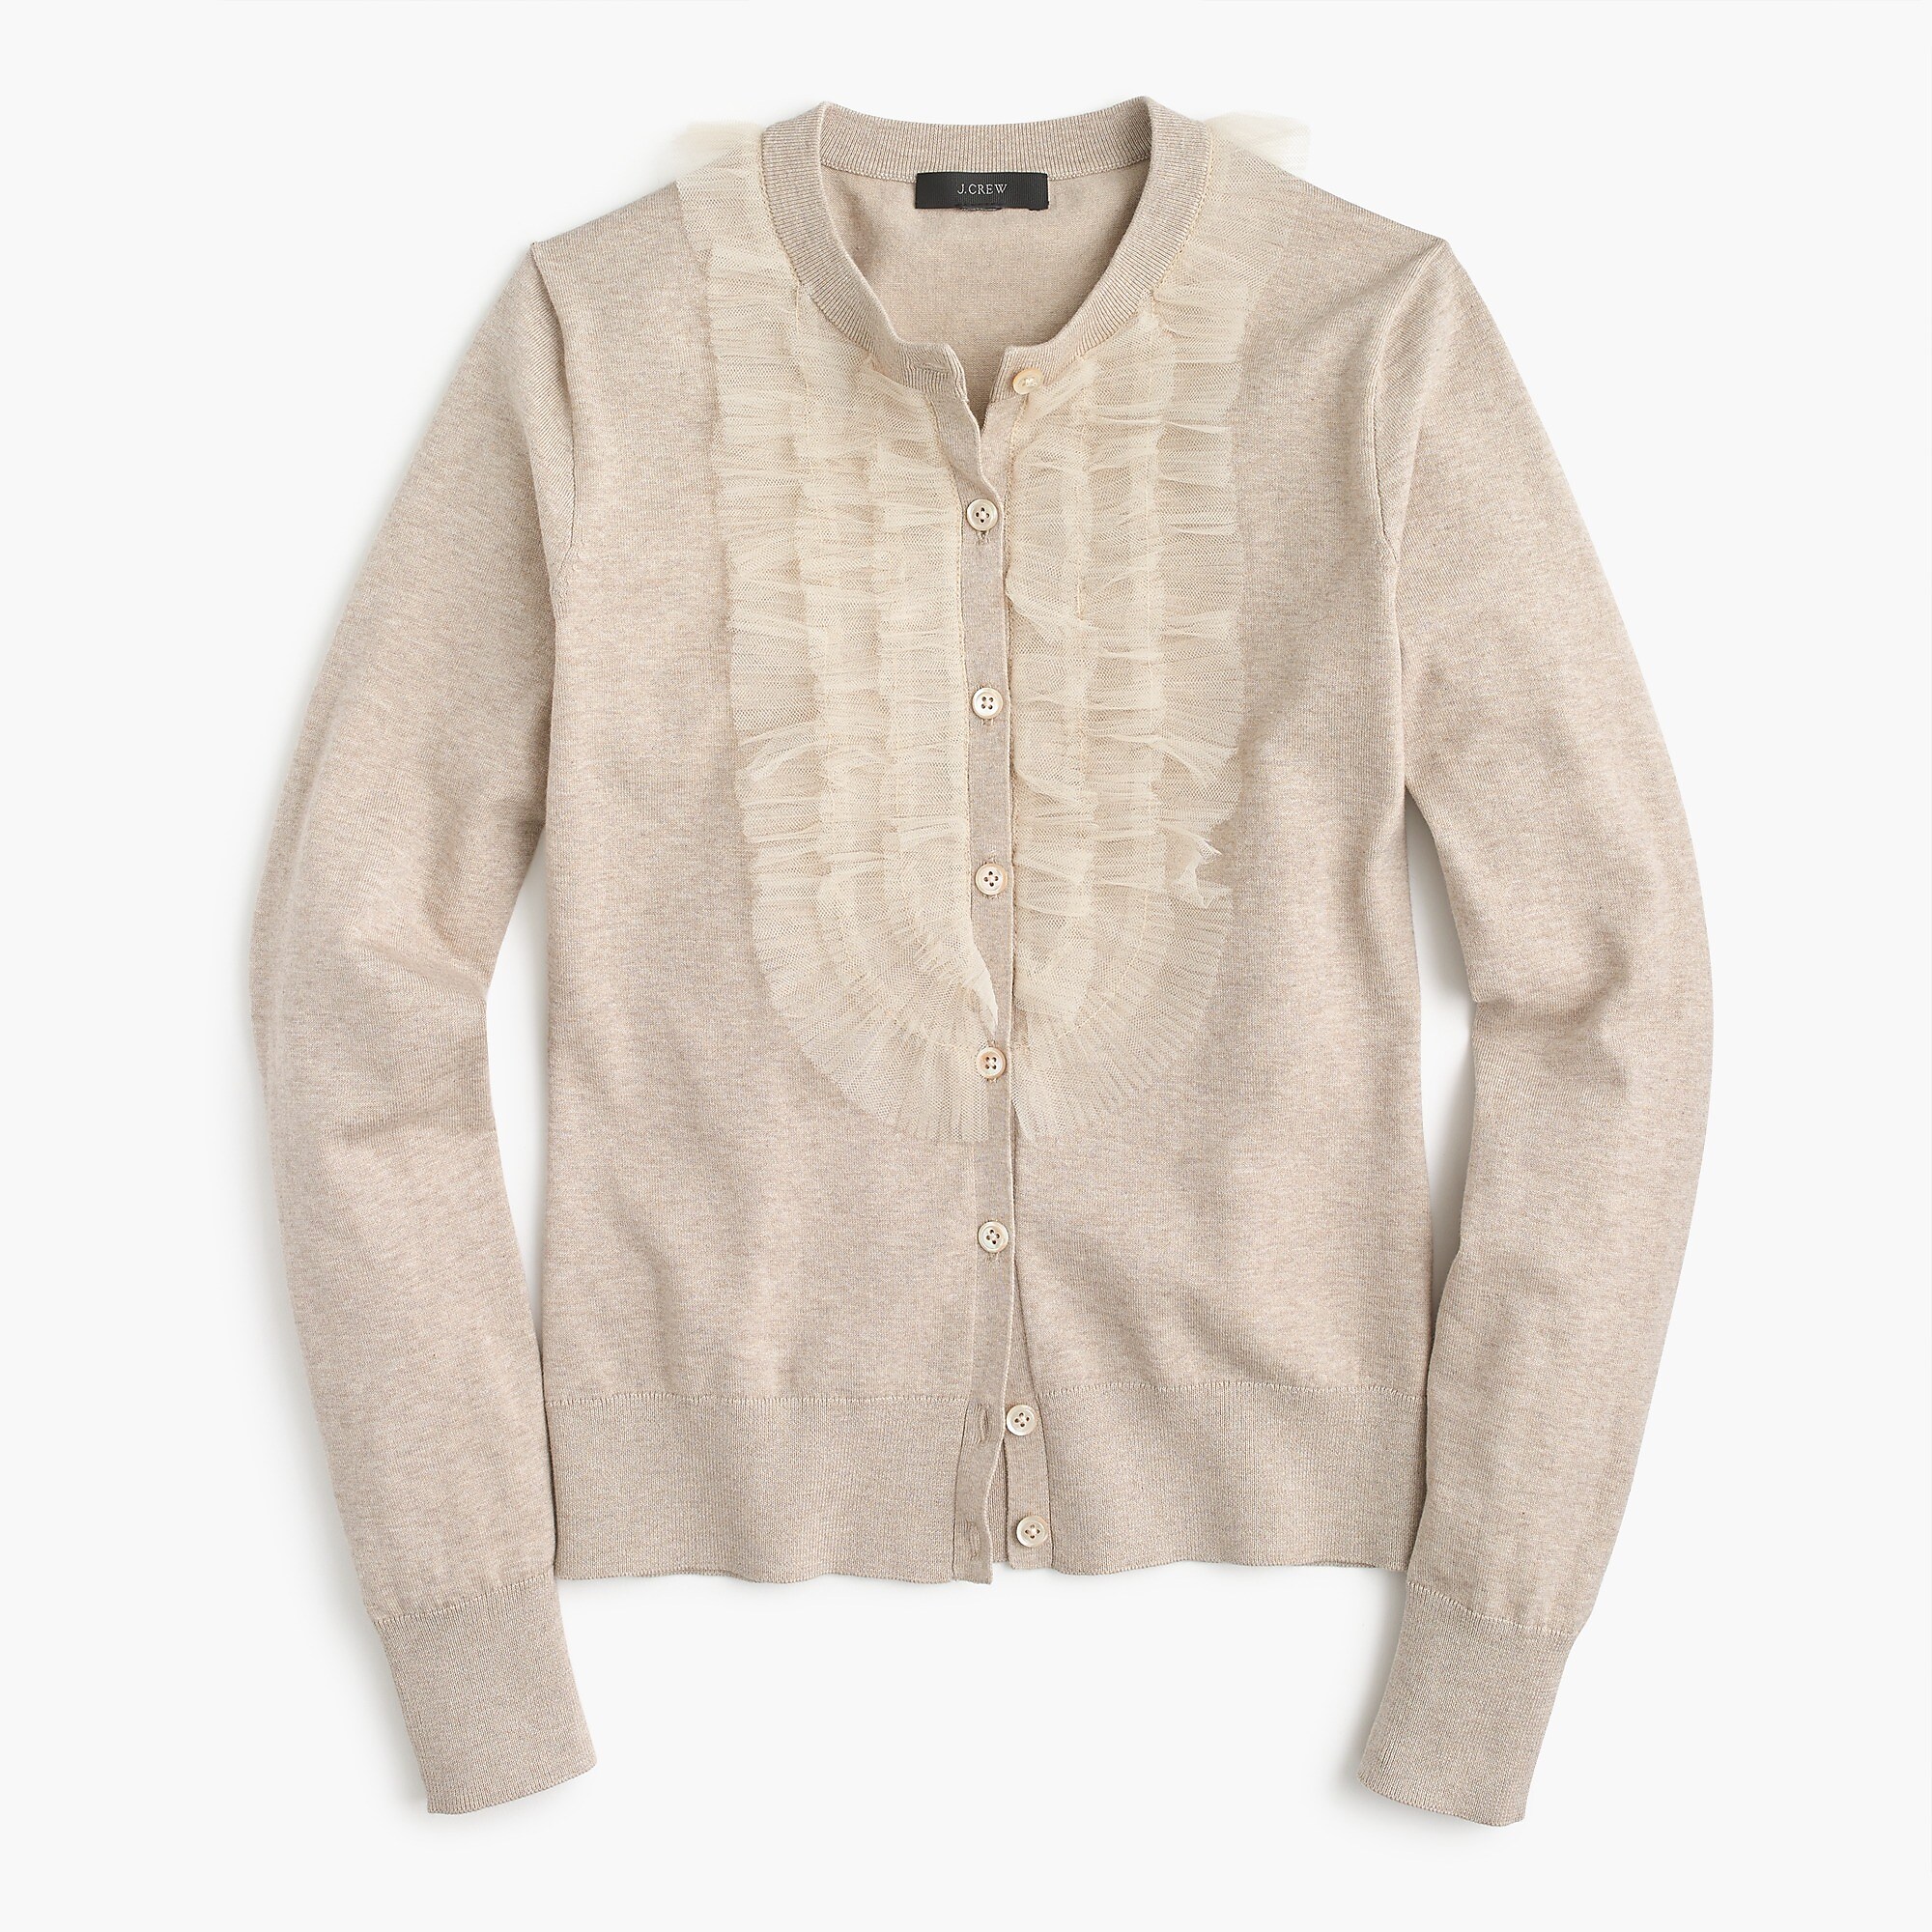 Cotton Jackie cardigan sweater with tulle : Women sweaters | J.Crew